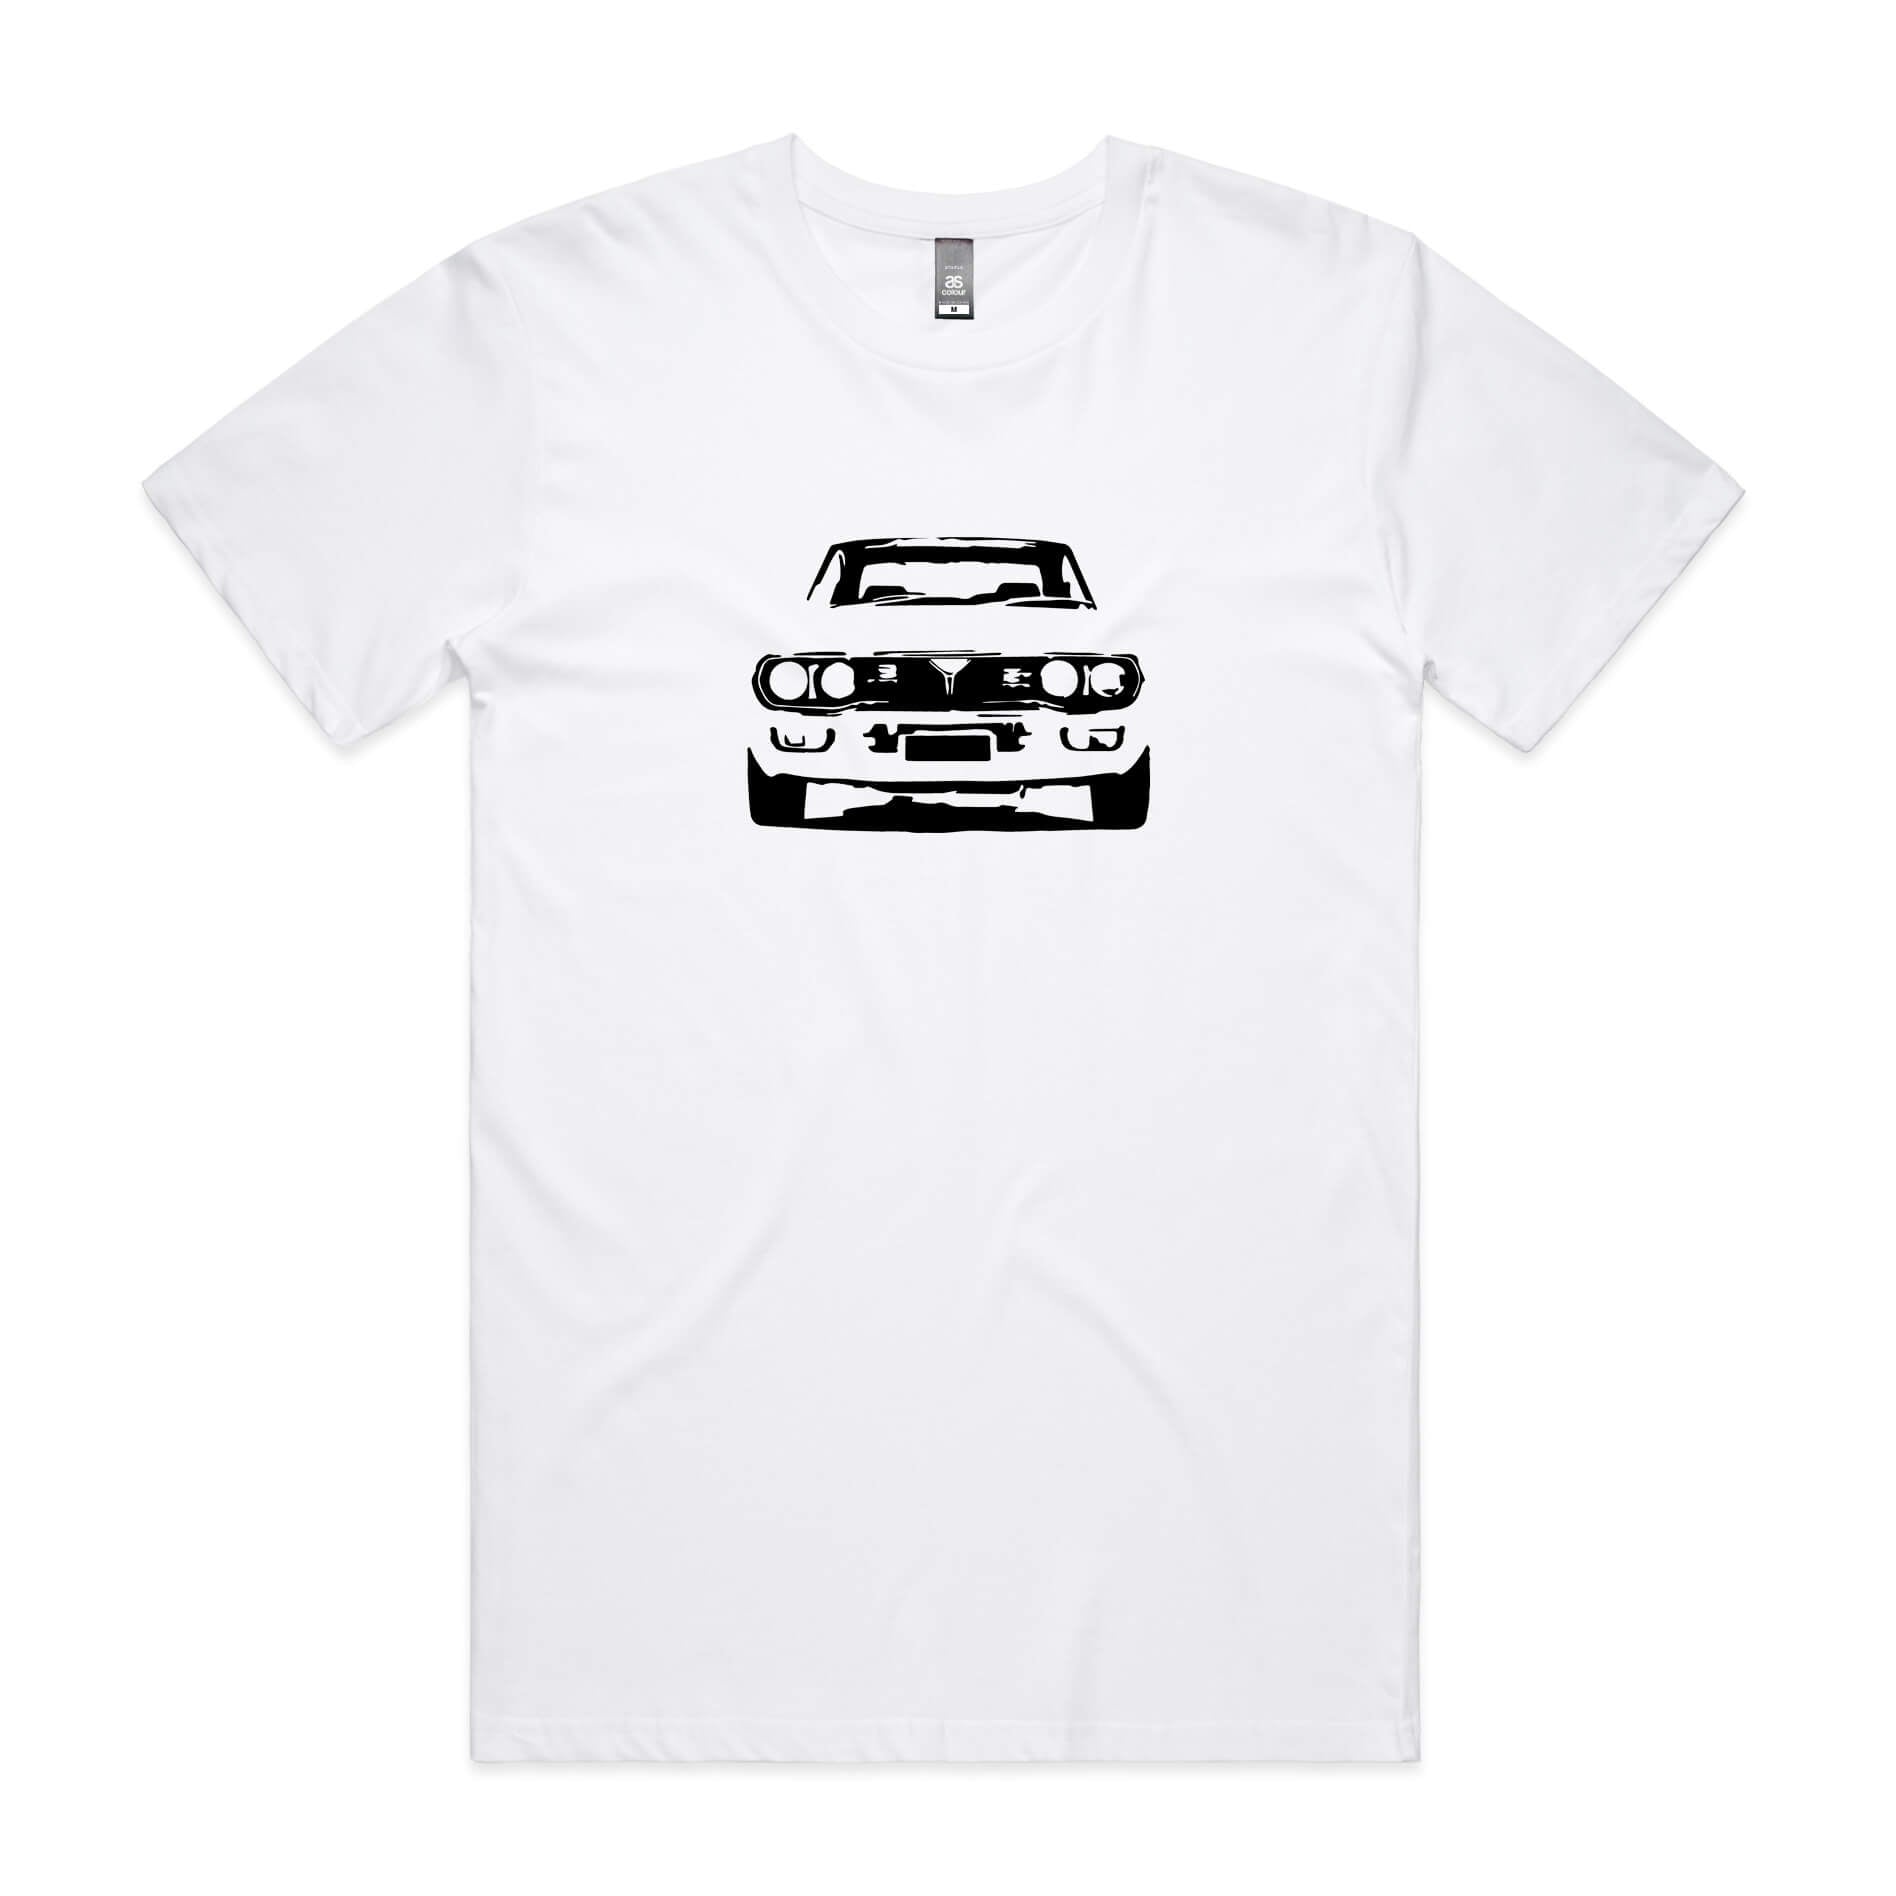 Mazda RX4 t-shirt in white with black rotary engine car graphic